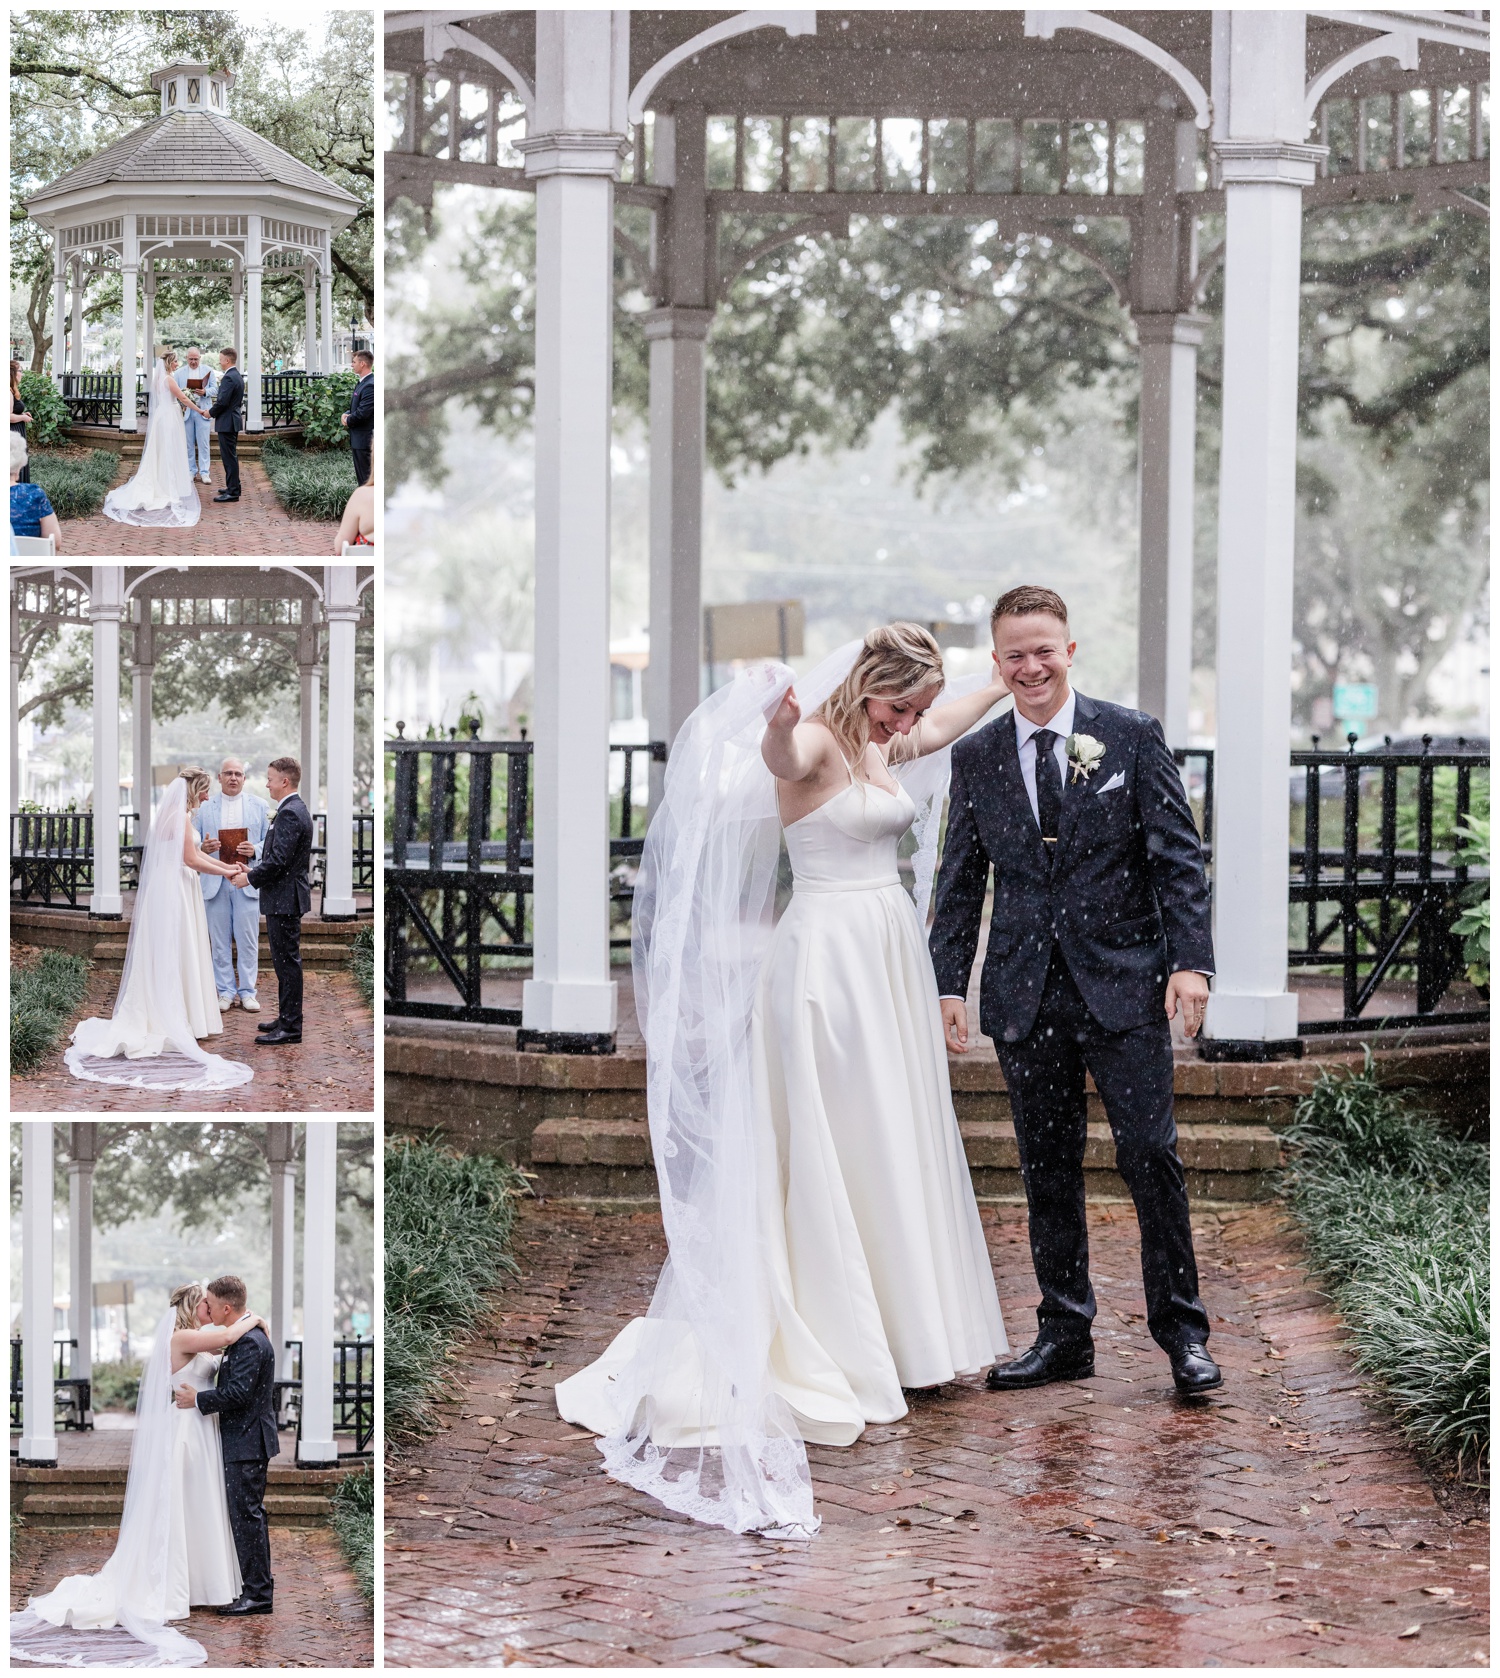 Eloping at Whitefield Square - the savannah elopement package - officiating by Reverend Steve